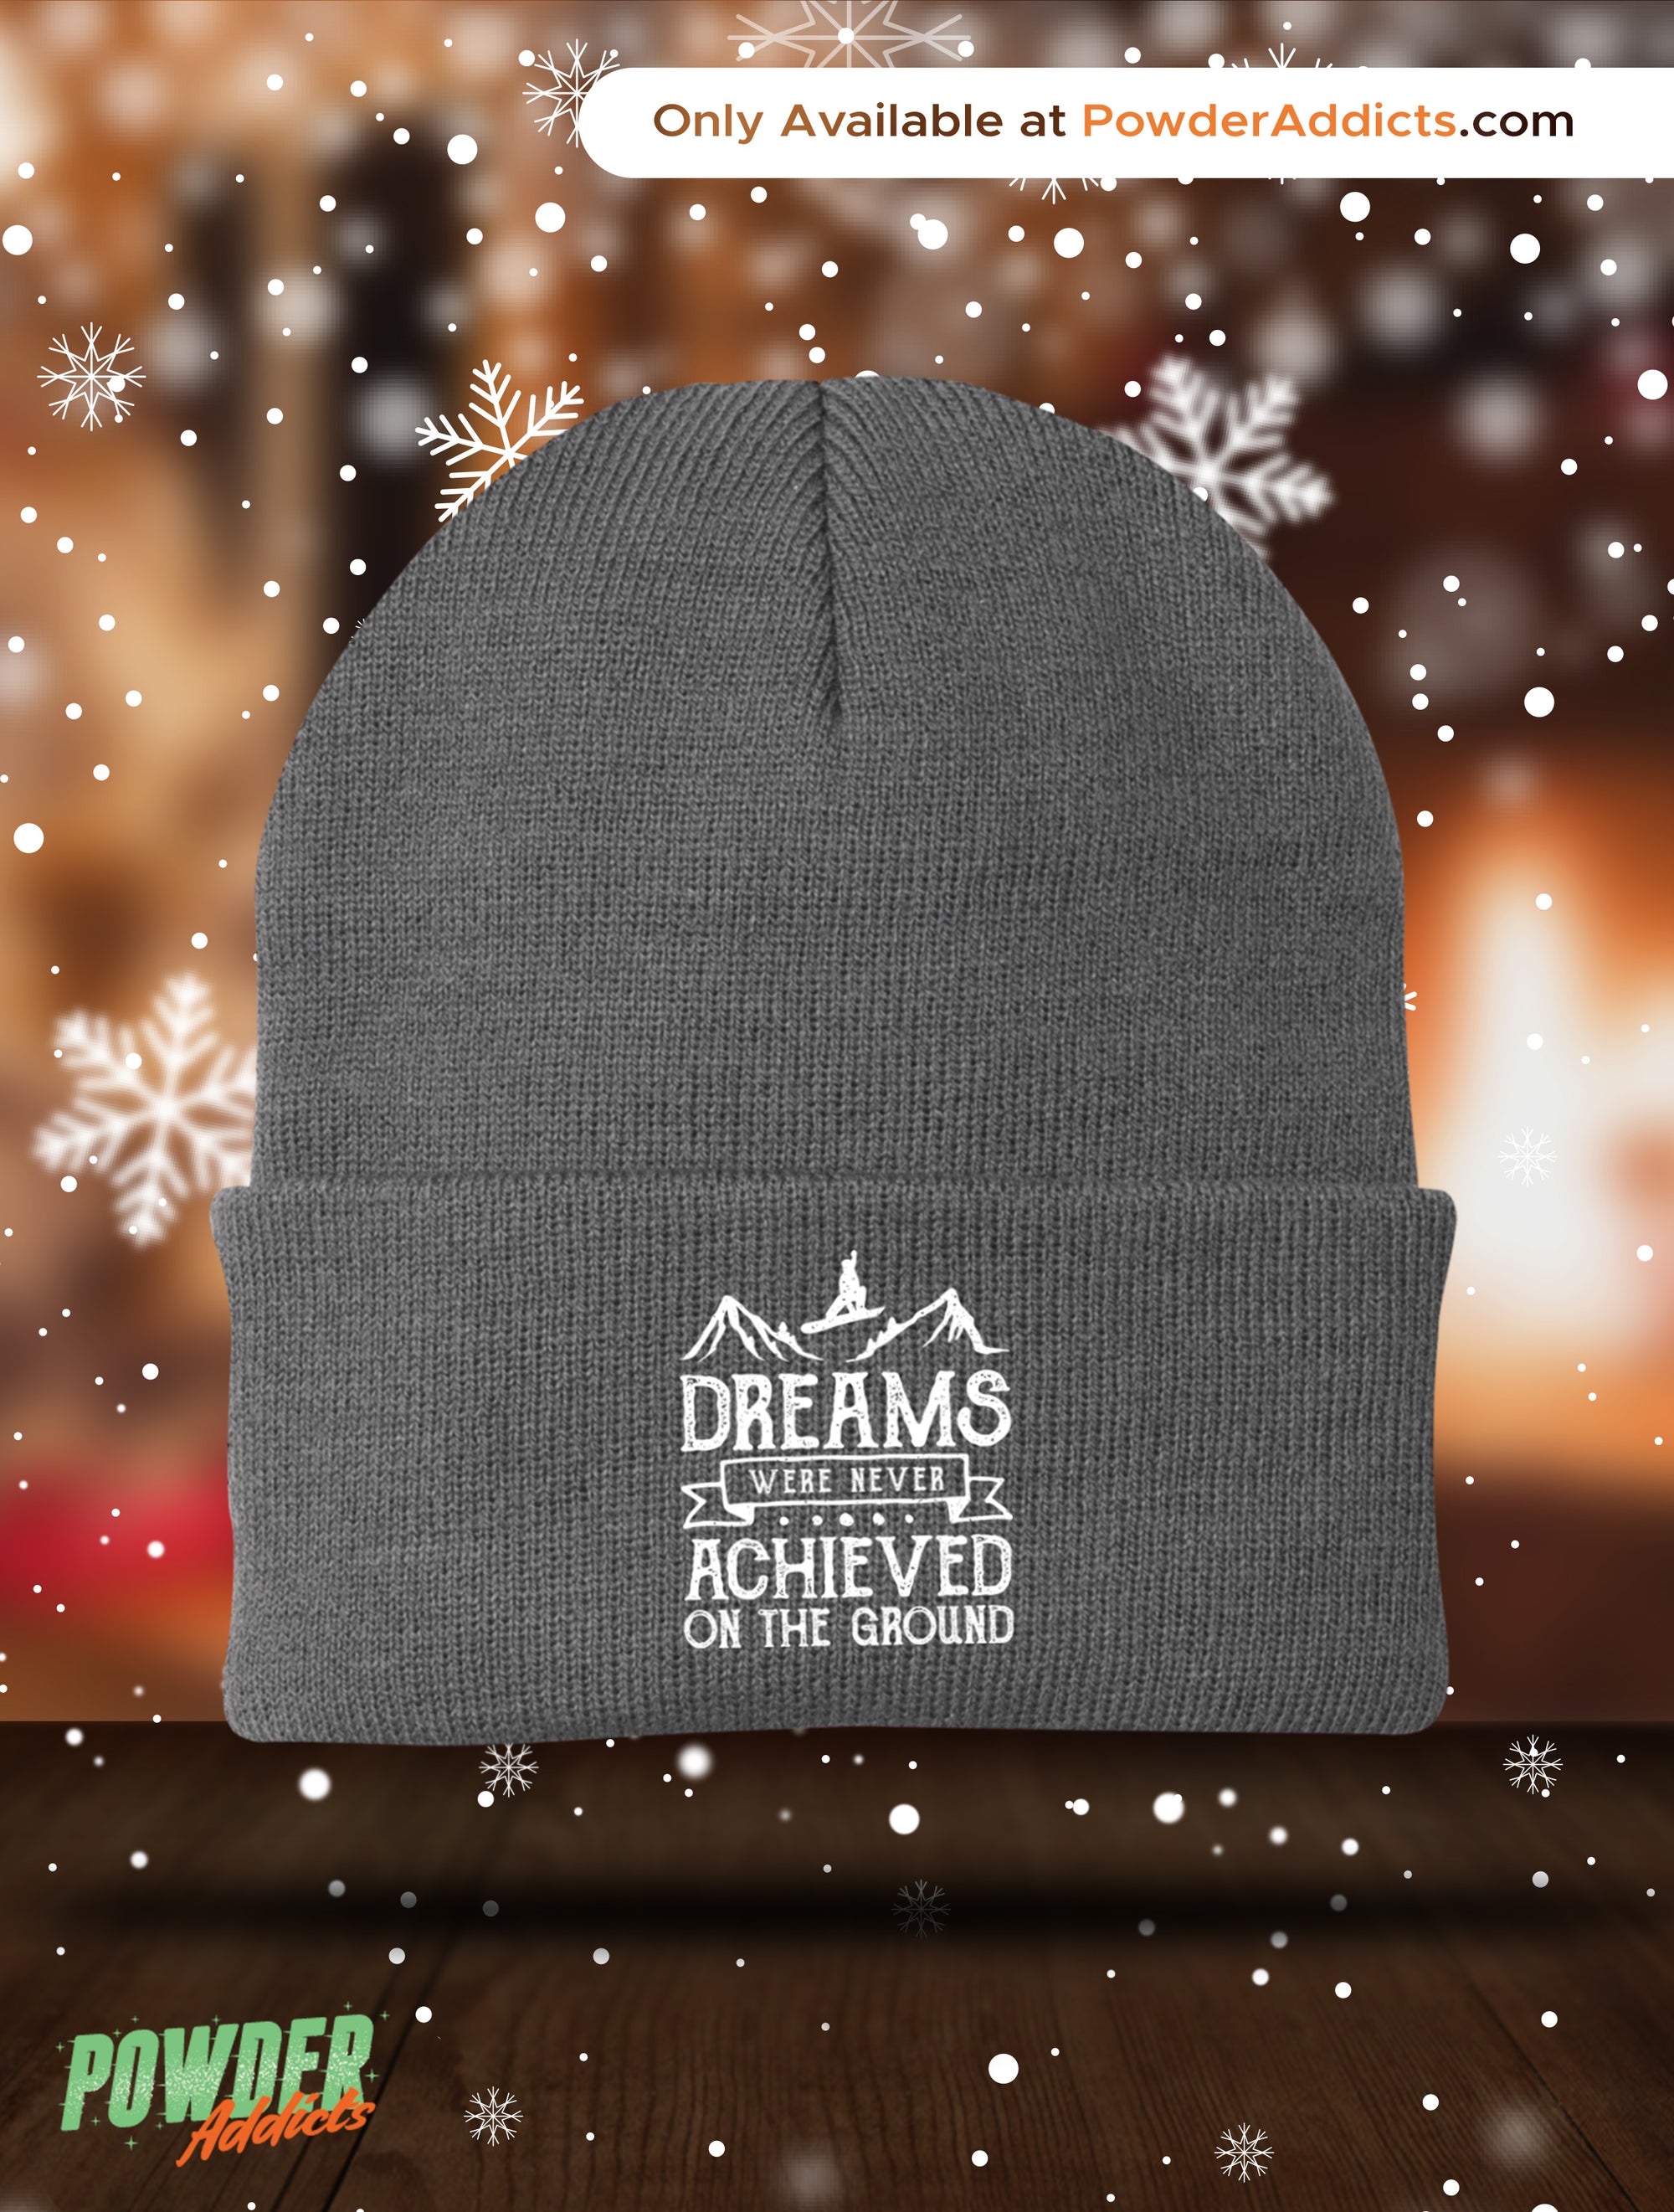 Dreams were Never Achieved on the Ground Knit Cap - Powderaddicts